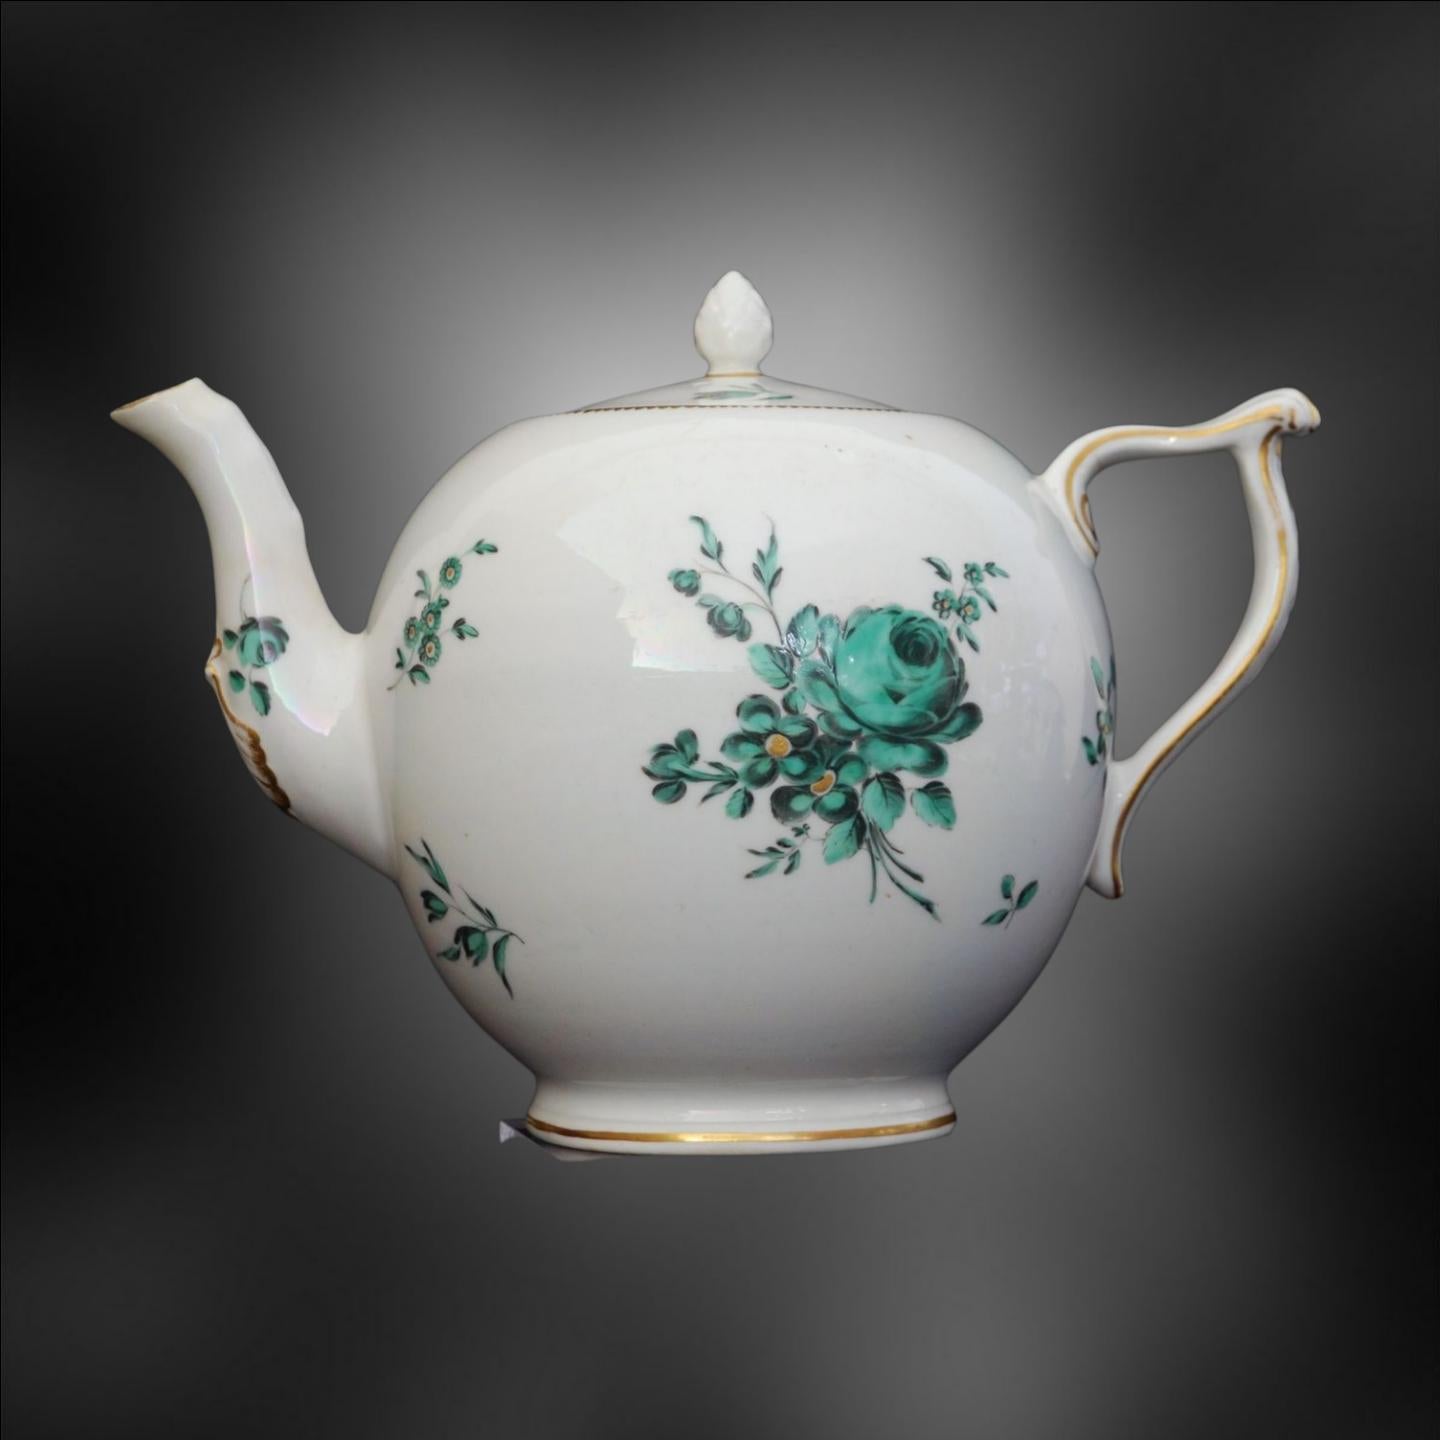 A gadrooned, canon-ball shape teapot, decorated with typical sprays of natural flowers. The shape and decoration are both in imitation of Meissen.

The Derby Porcelain Works, now known as the Royal Crown Derby Porcelain Company, is a British